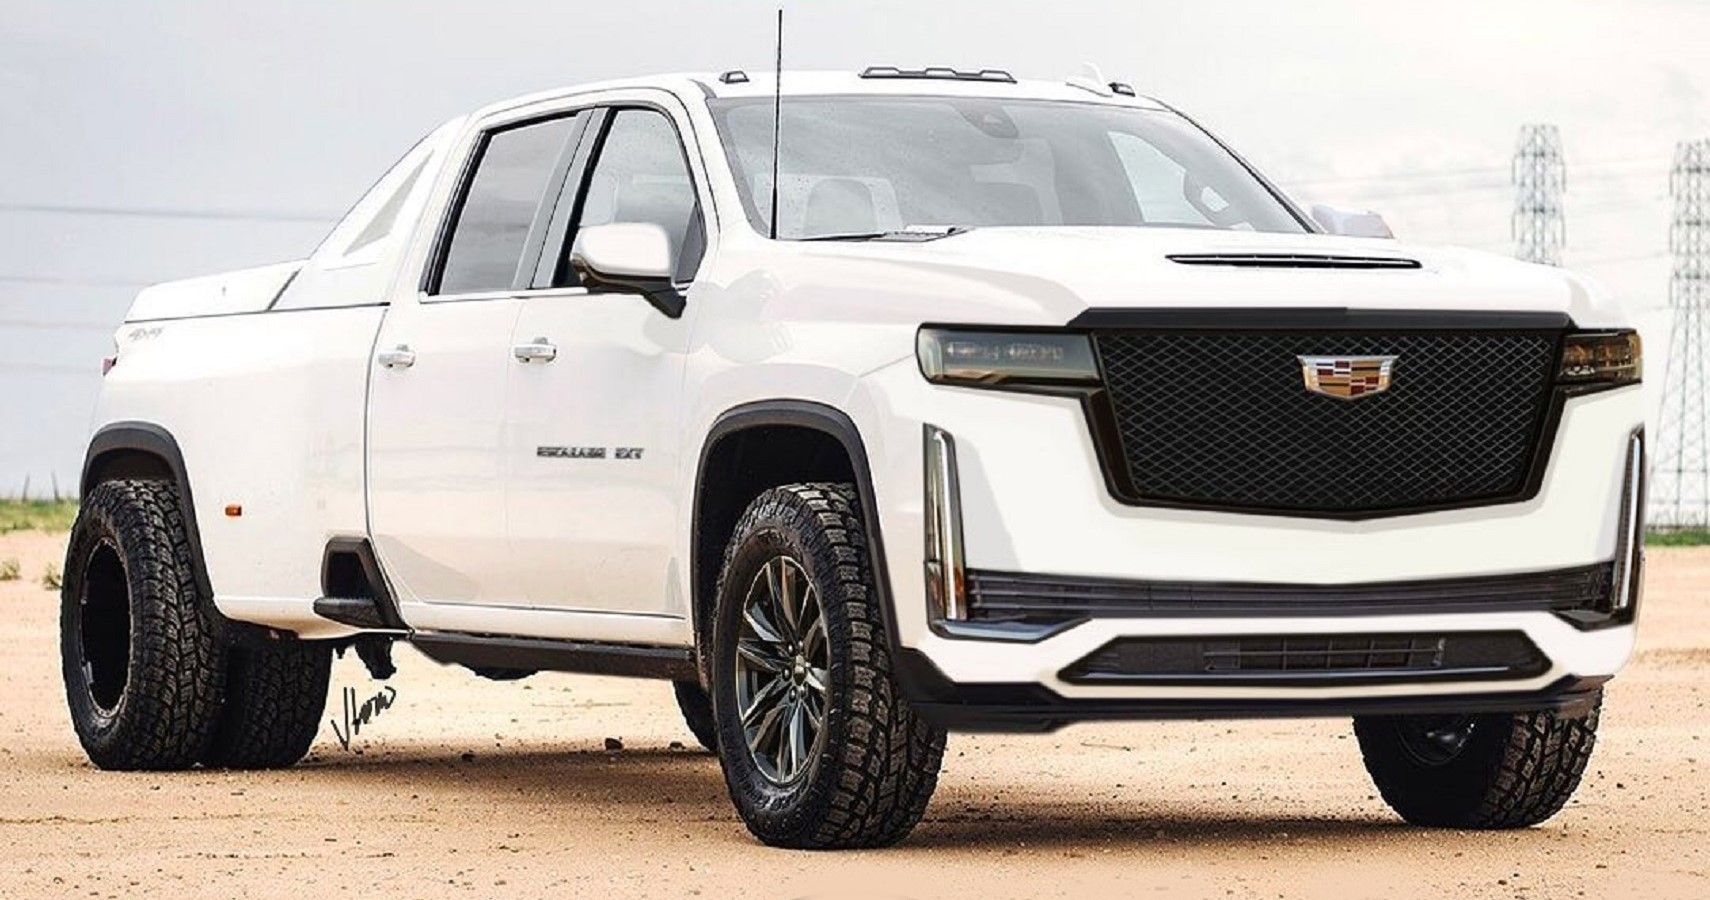 You Won't Believe Some Of These Dually Pickup Renderings Like This